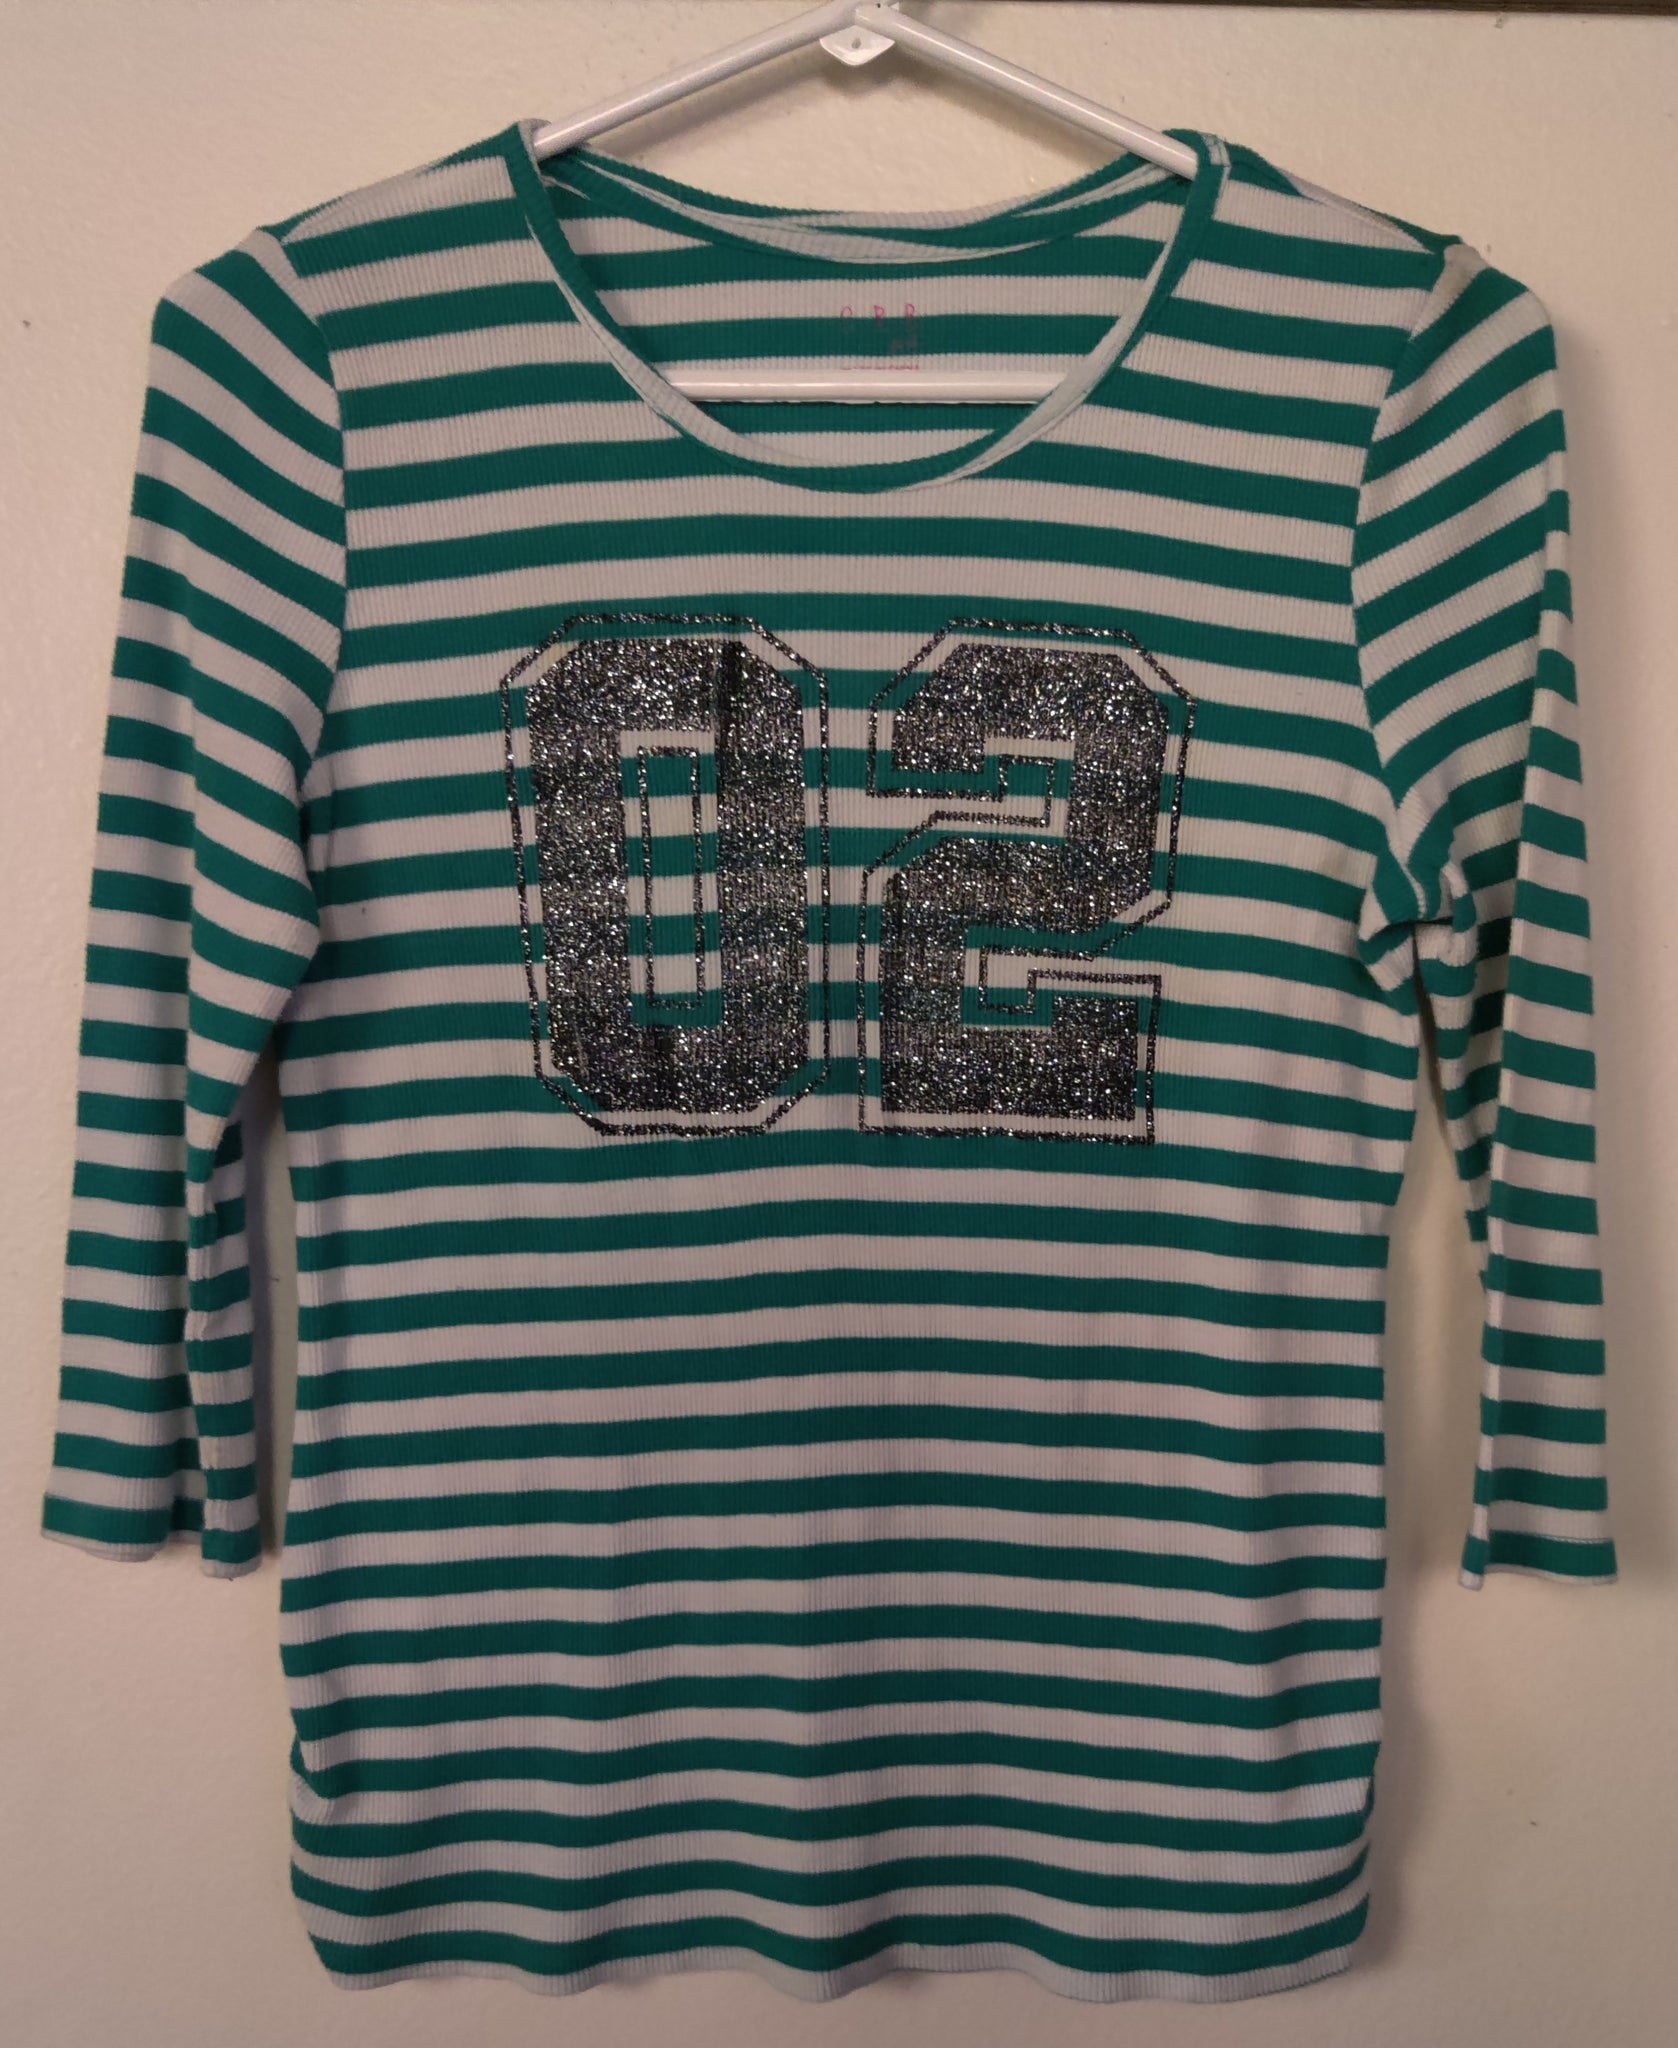 XL 18 1/2 CRB GIRL Green & White Striped Jersey Number Shirt